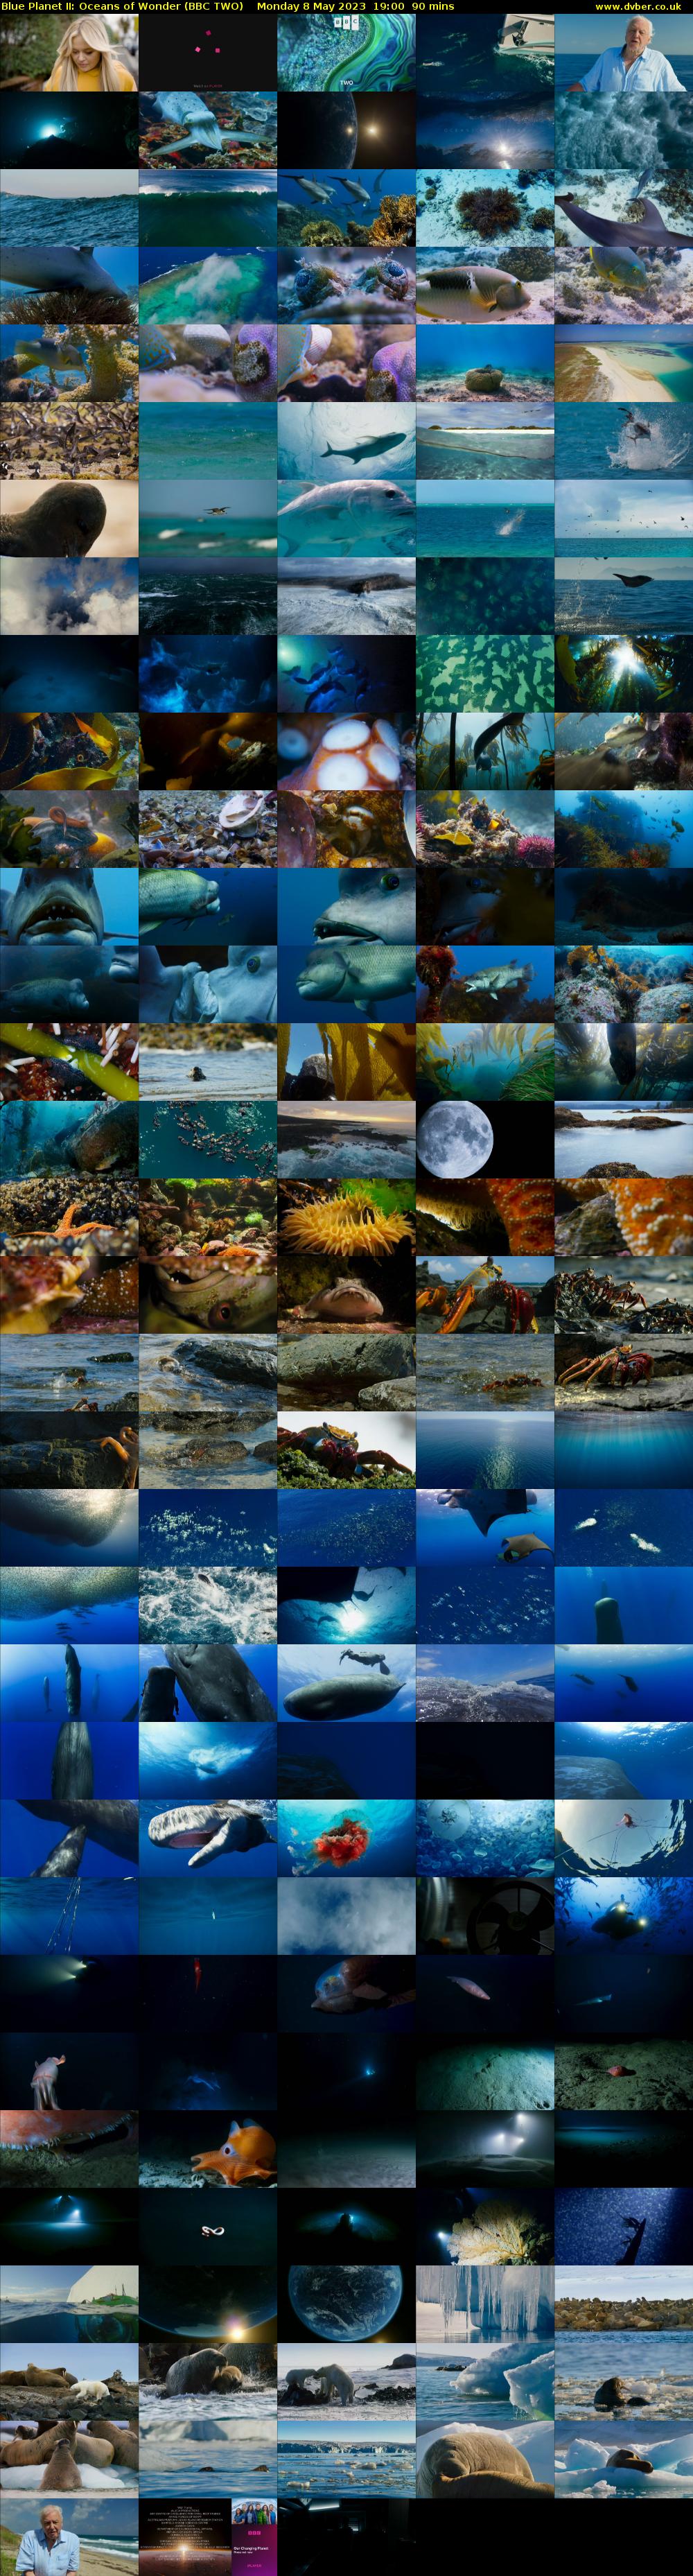 Blue Planet II: Oceans of Wonder (BBC TWO) Monday 8 May 2023 19:00 - 20:30